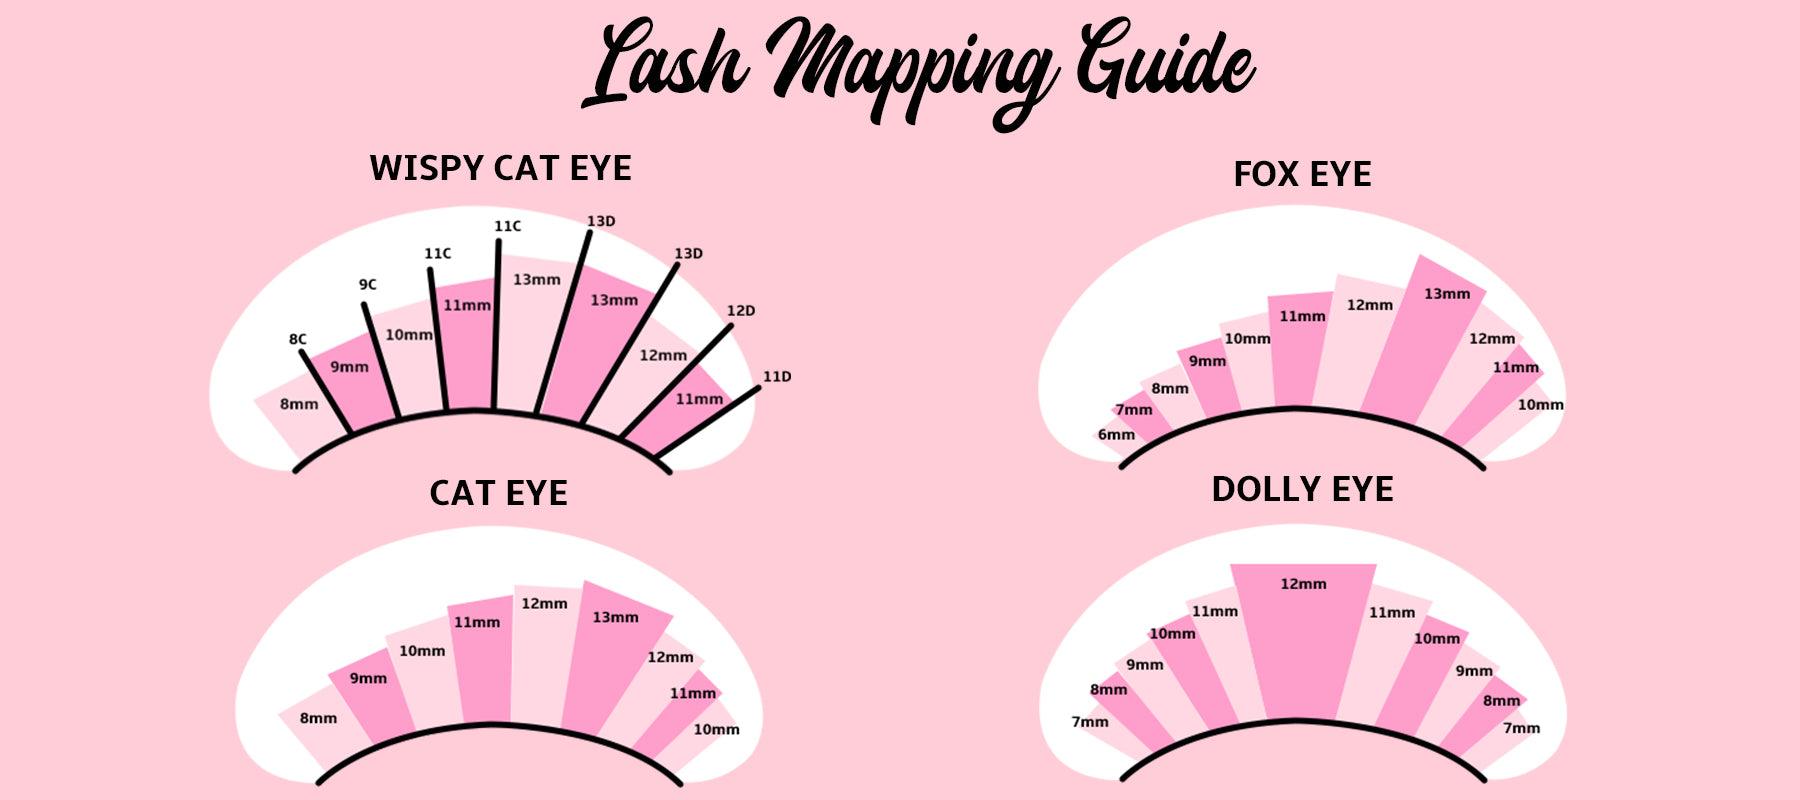 LASH MAPPING GUIDE